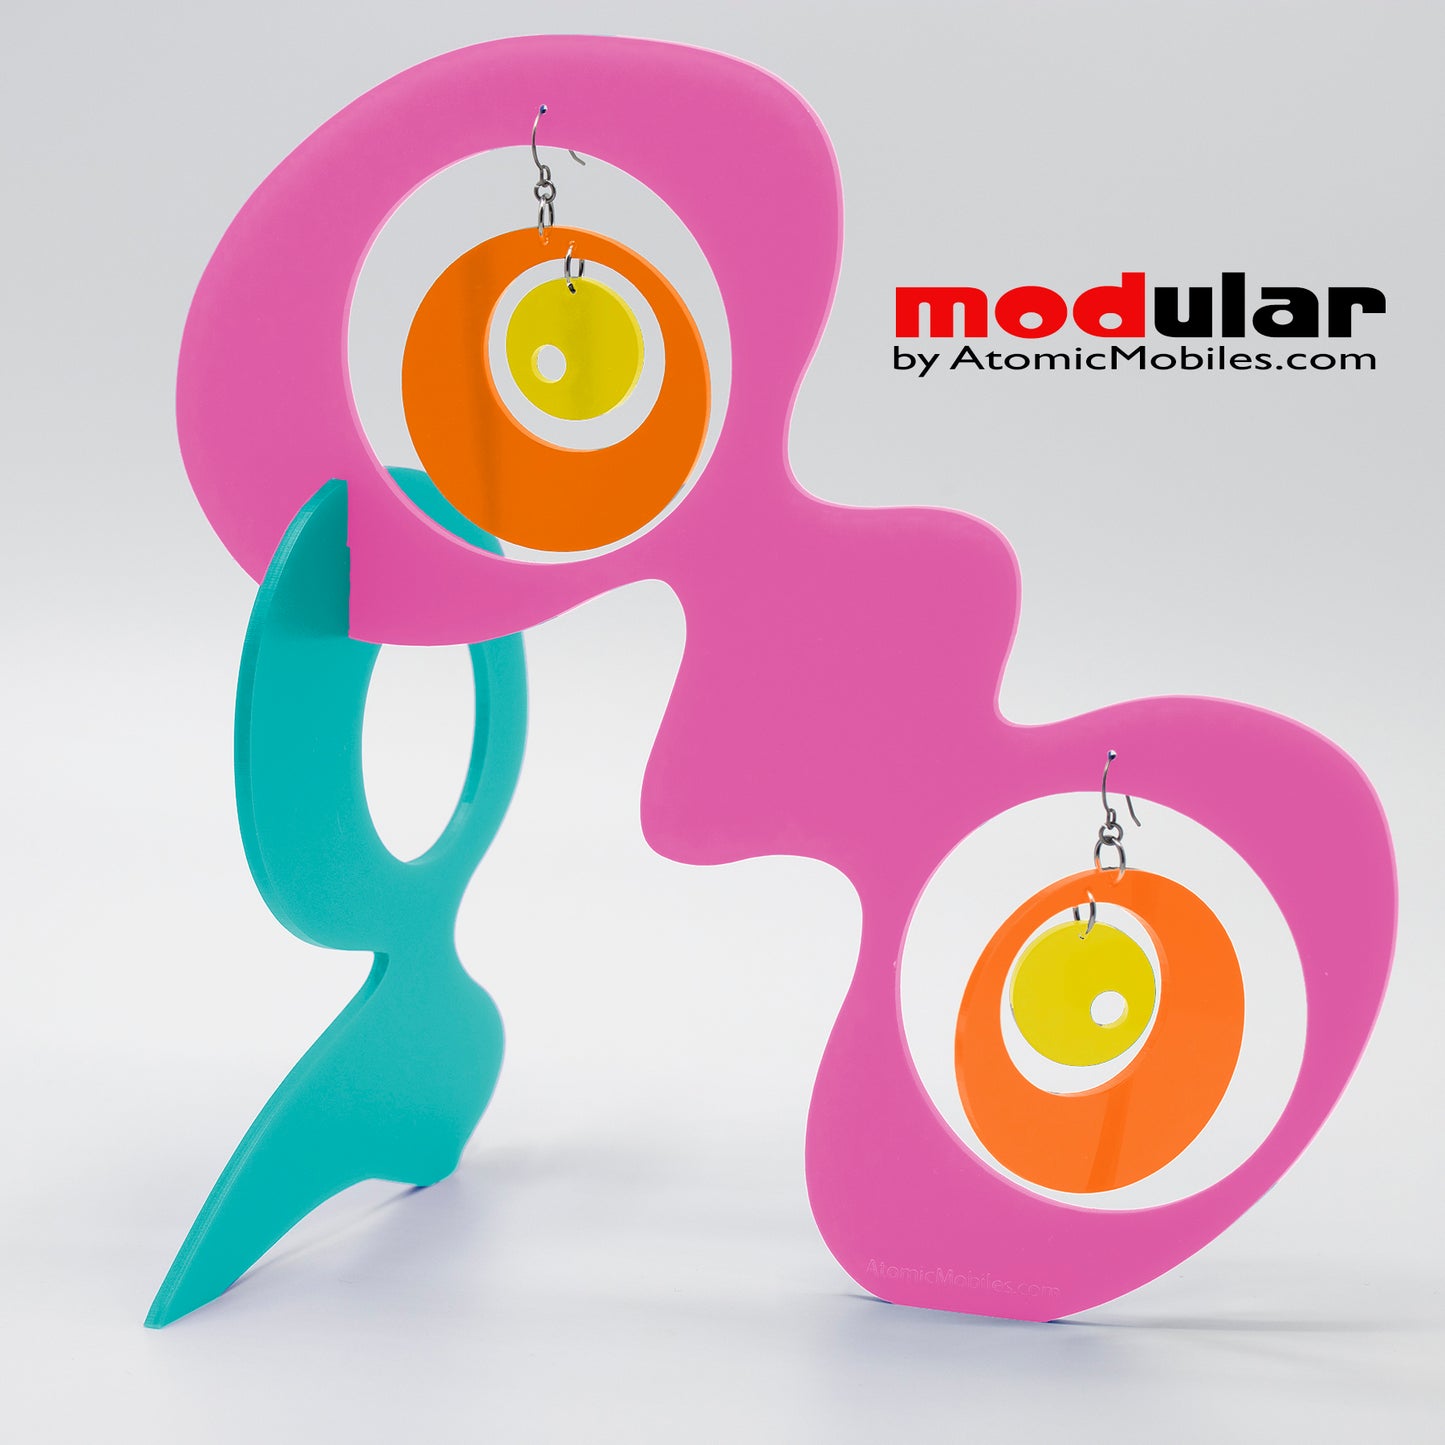 Handmade Groovy style earrings and stabile kinetic modern art sculpture in Hot Pink Aqua Orange and Yellow by AtomicMobiles.com